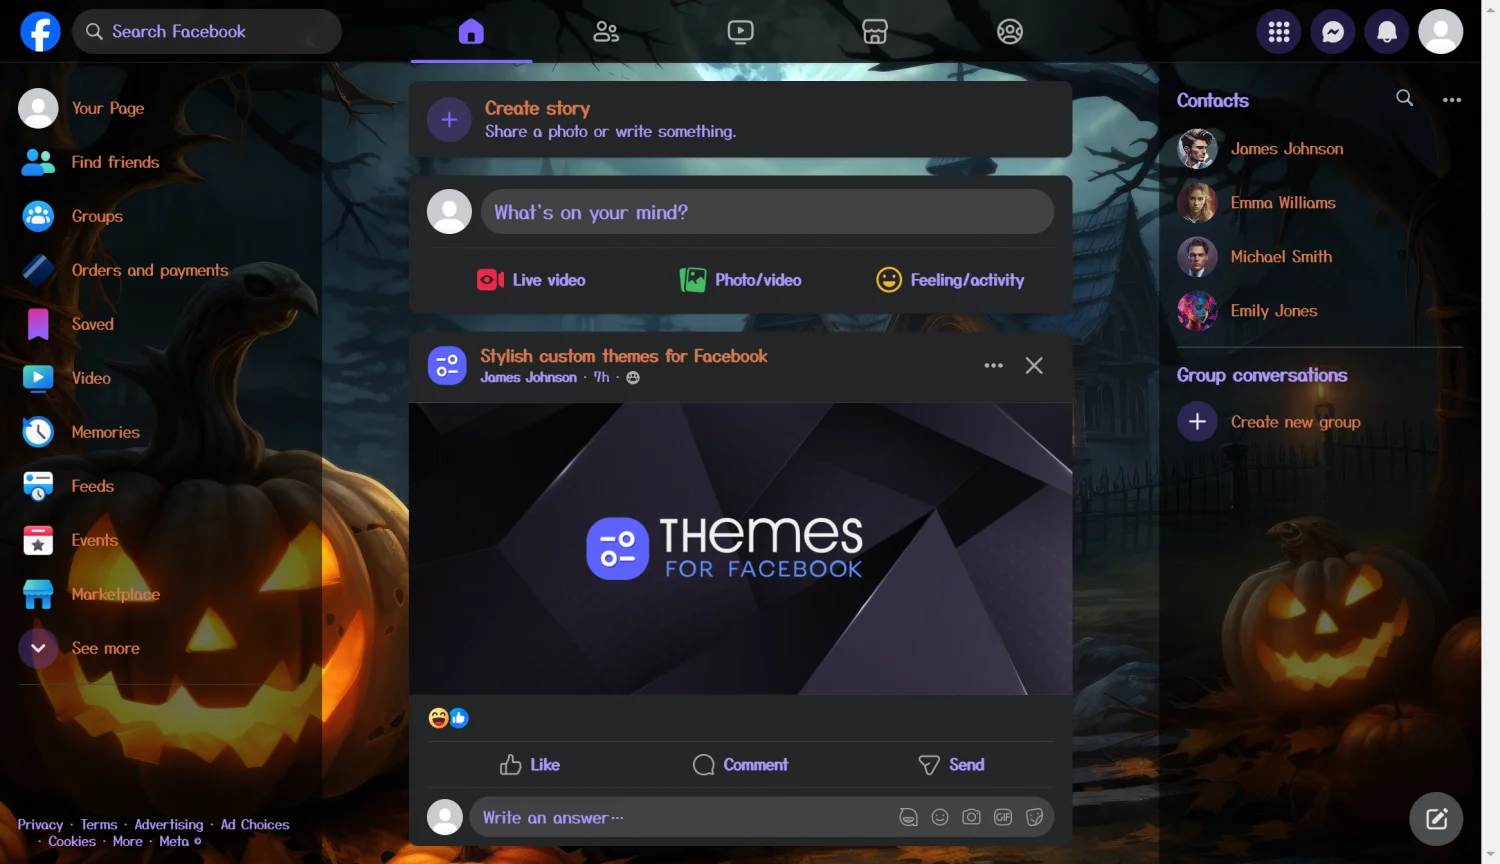 Spooky Halloween Scene with Pumpkins and Haunted House theme for facebook dark mode